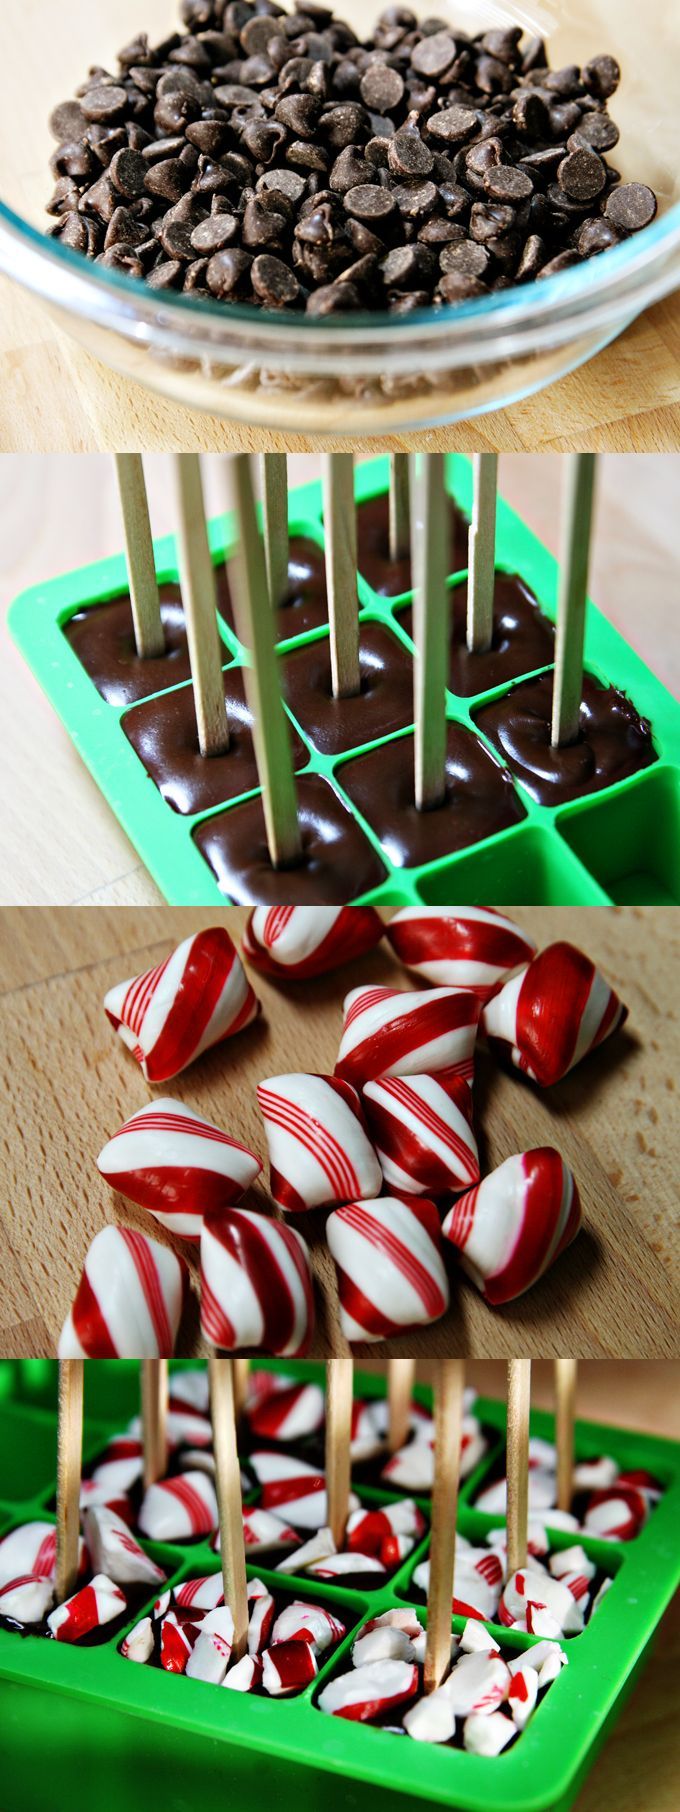 (handmade holiday party) diy hot chocolate on a stick & other neighbor gifts